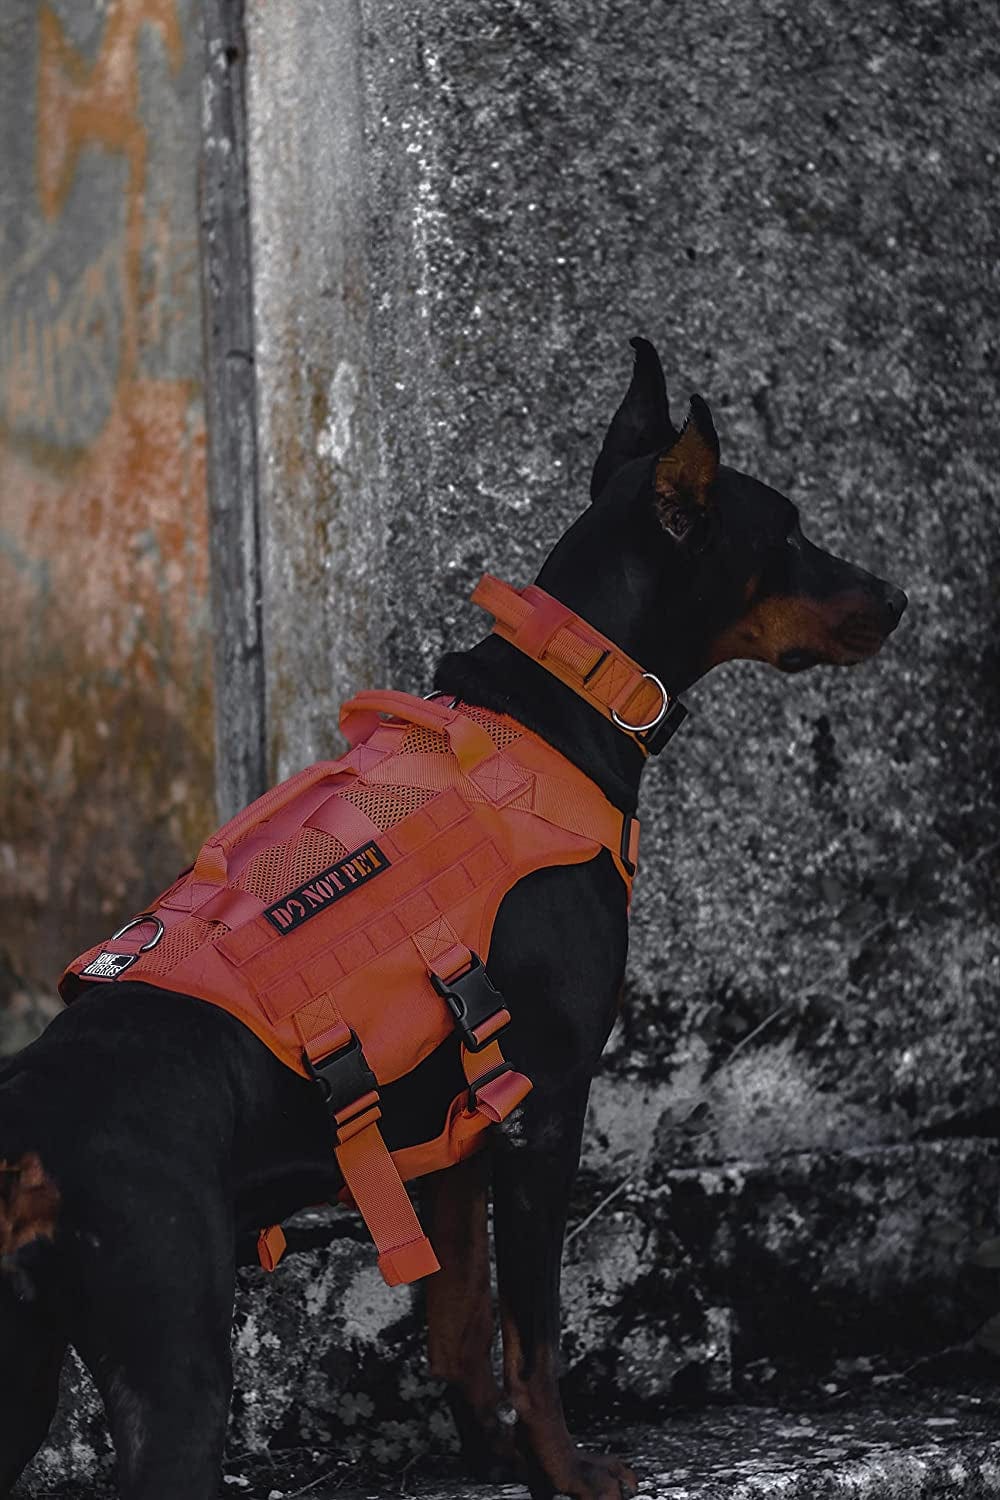 OneTigris Tactical Dog Harness Vest with Handle, Military Dog